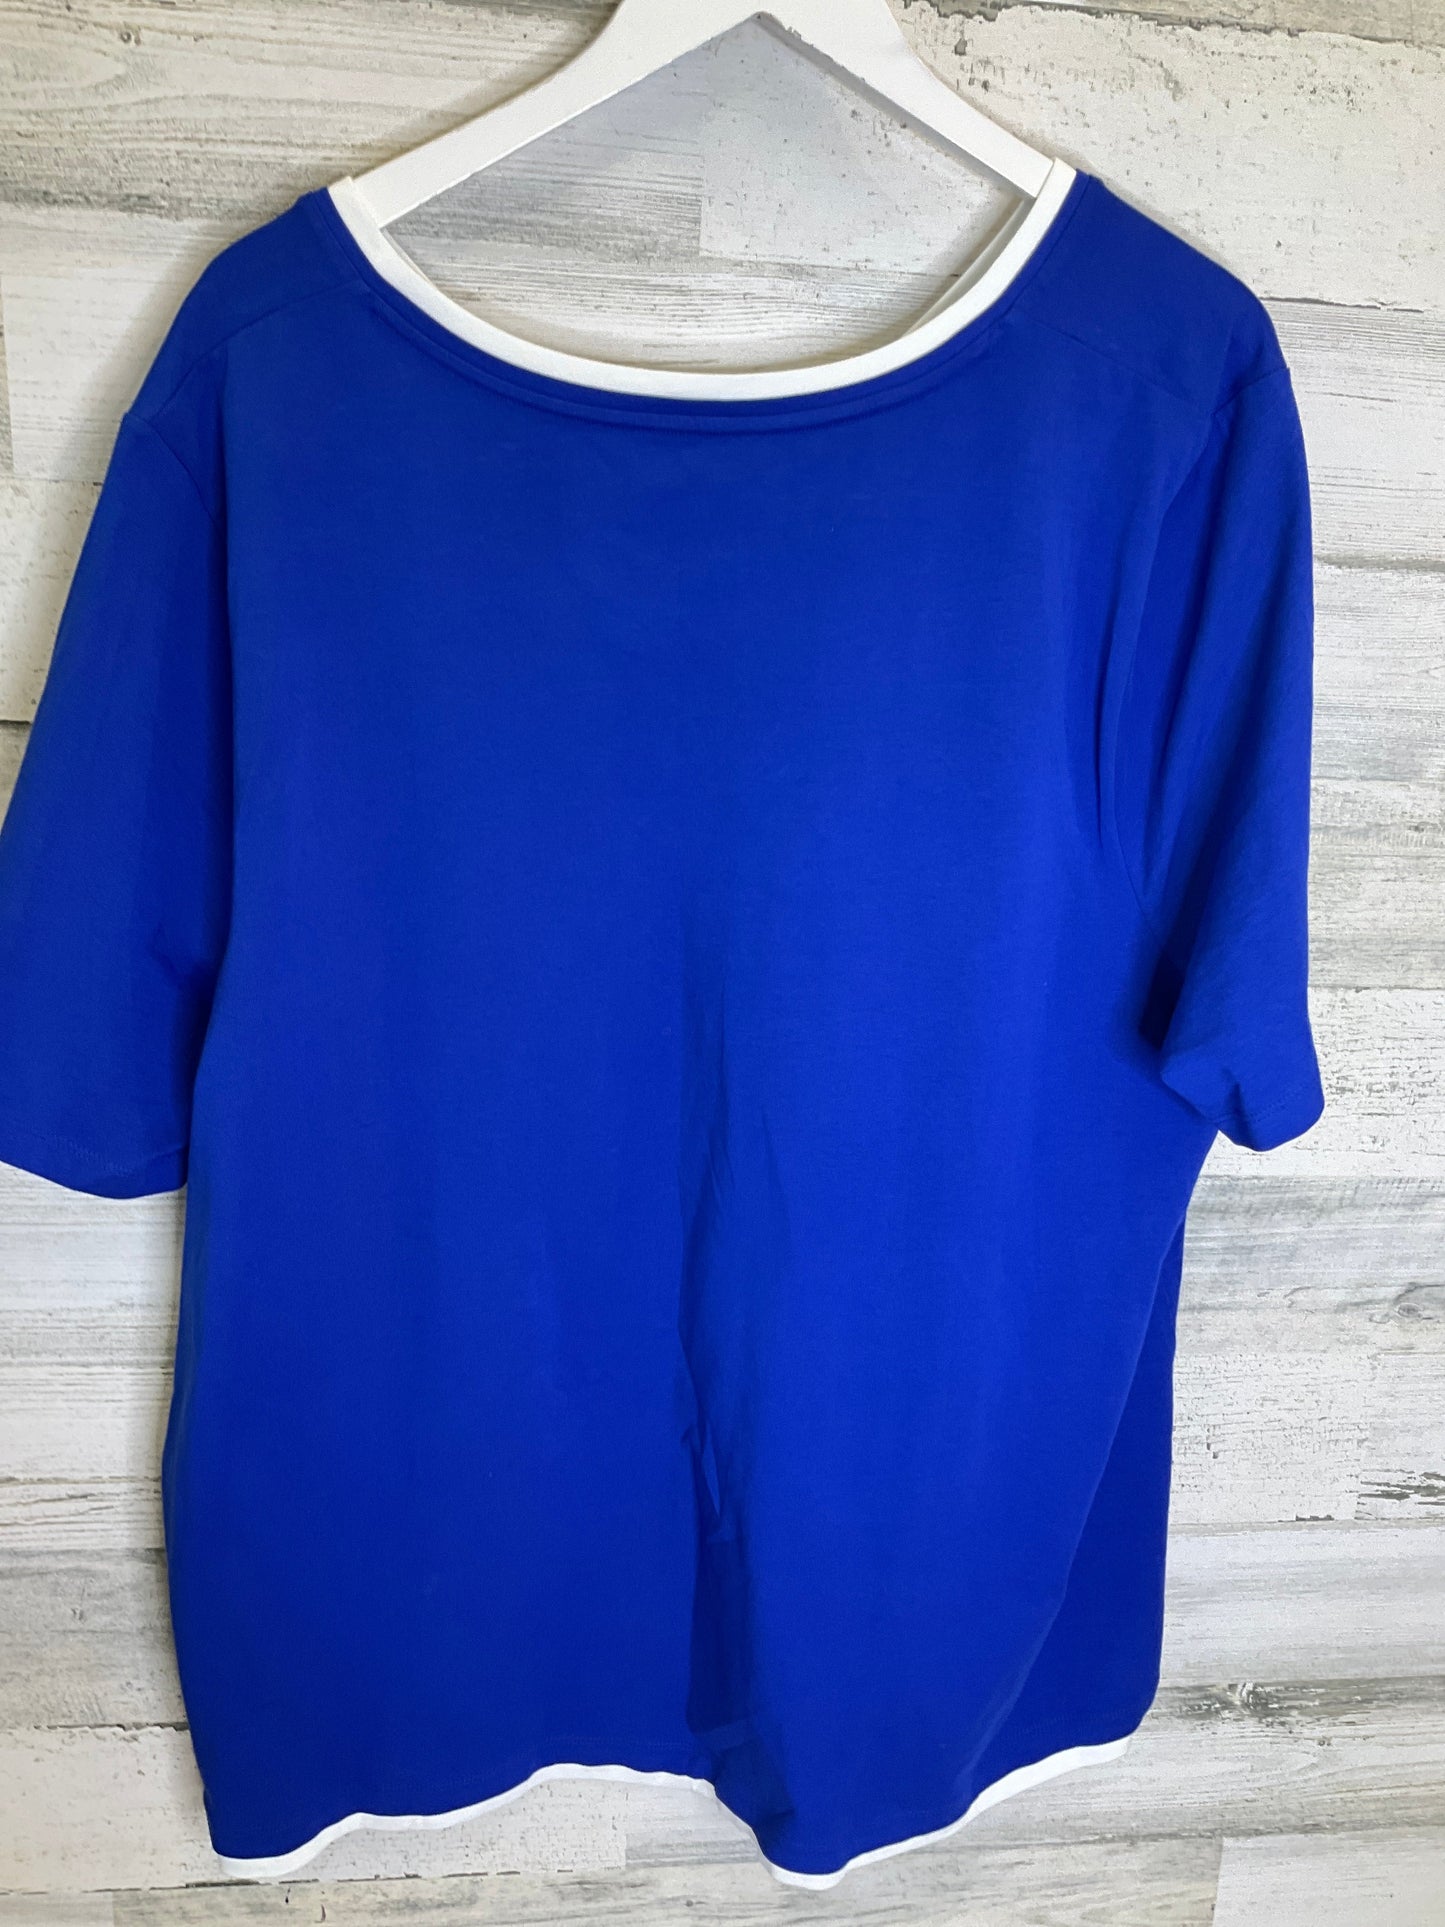 Blue Top Short Sleeve Catherines, Size 2x